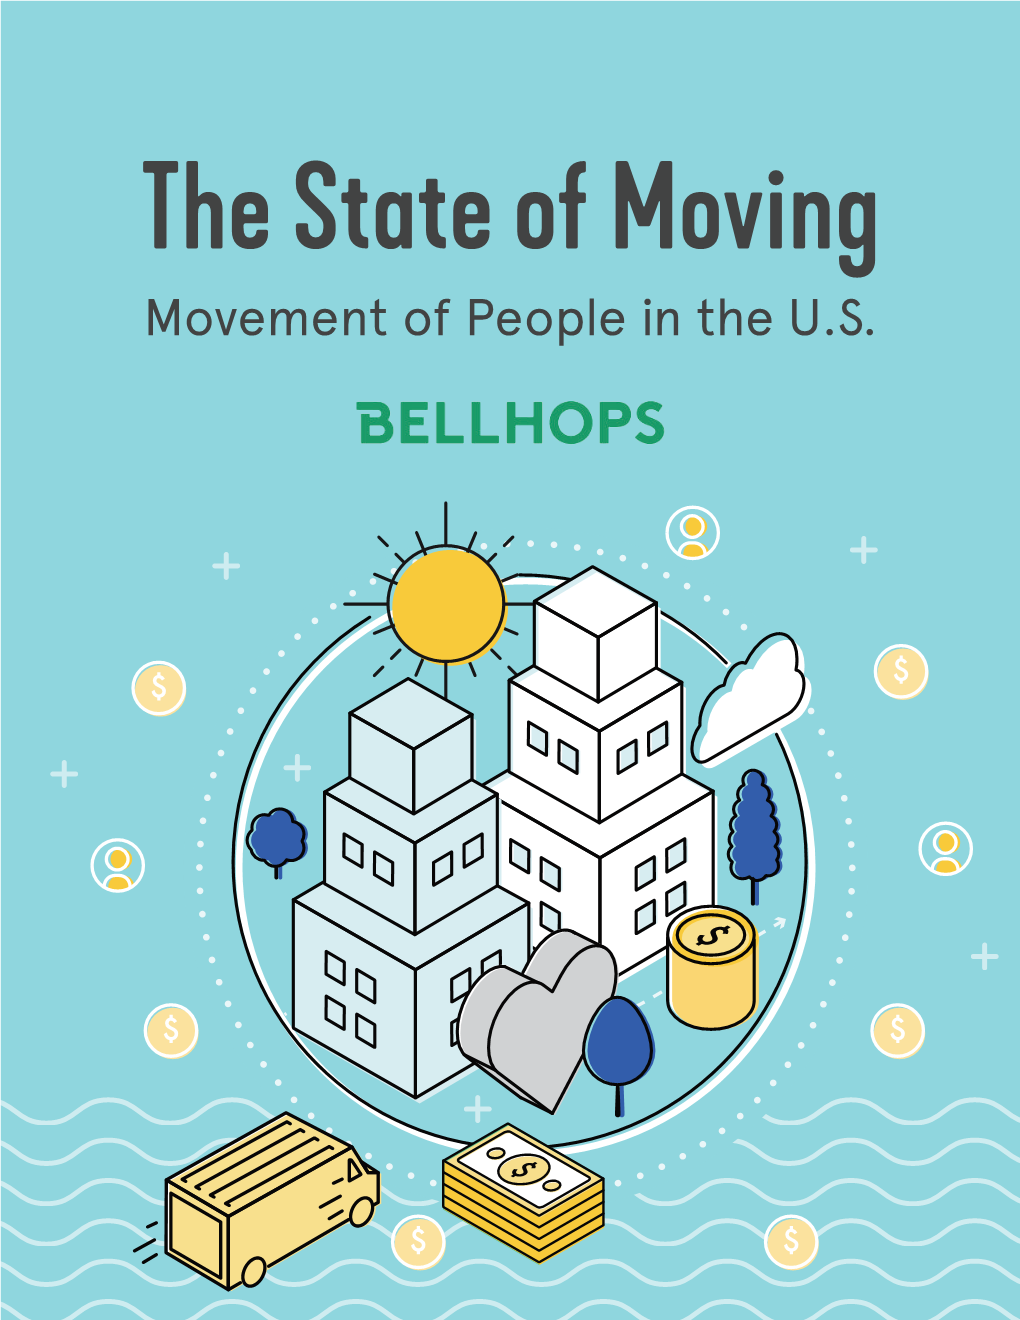 Movement of People in the U.S